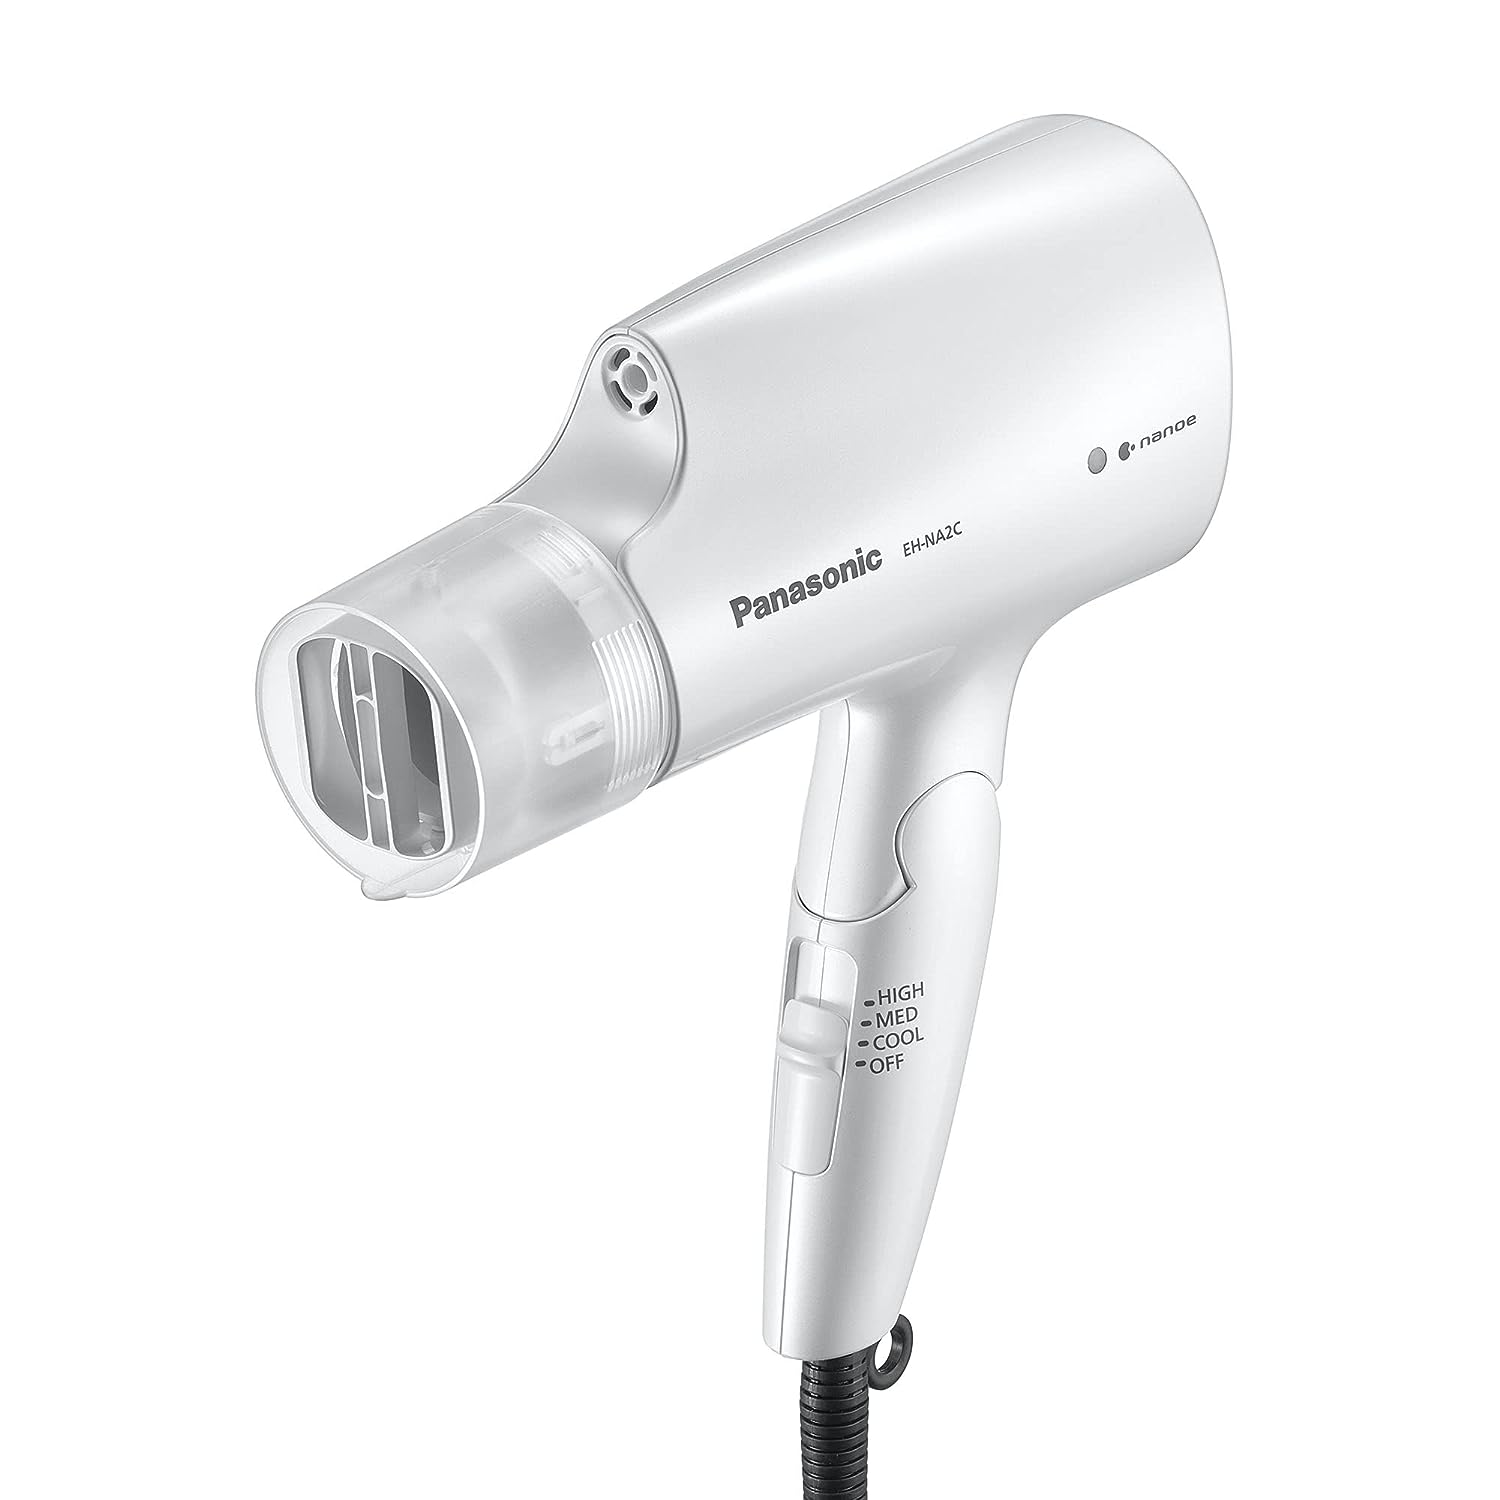 Panasonic nanoe Salon Hair Dryer with Oscillating Quick Dry Nozzle, Folding Hair Dryer for Travel and Home, 3 Airflow Settings for Easy Styling and Healthy Hair - EH-NA2C-W (White)